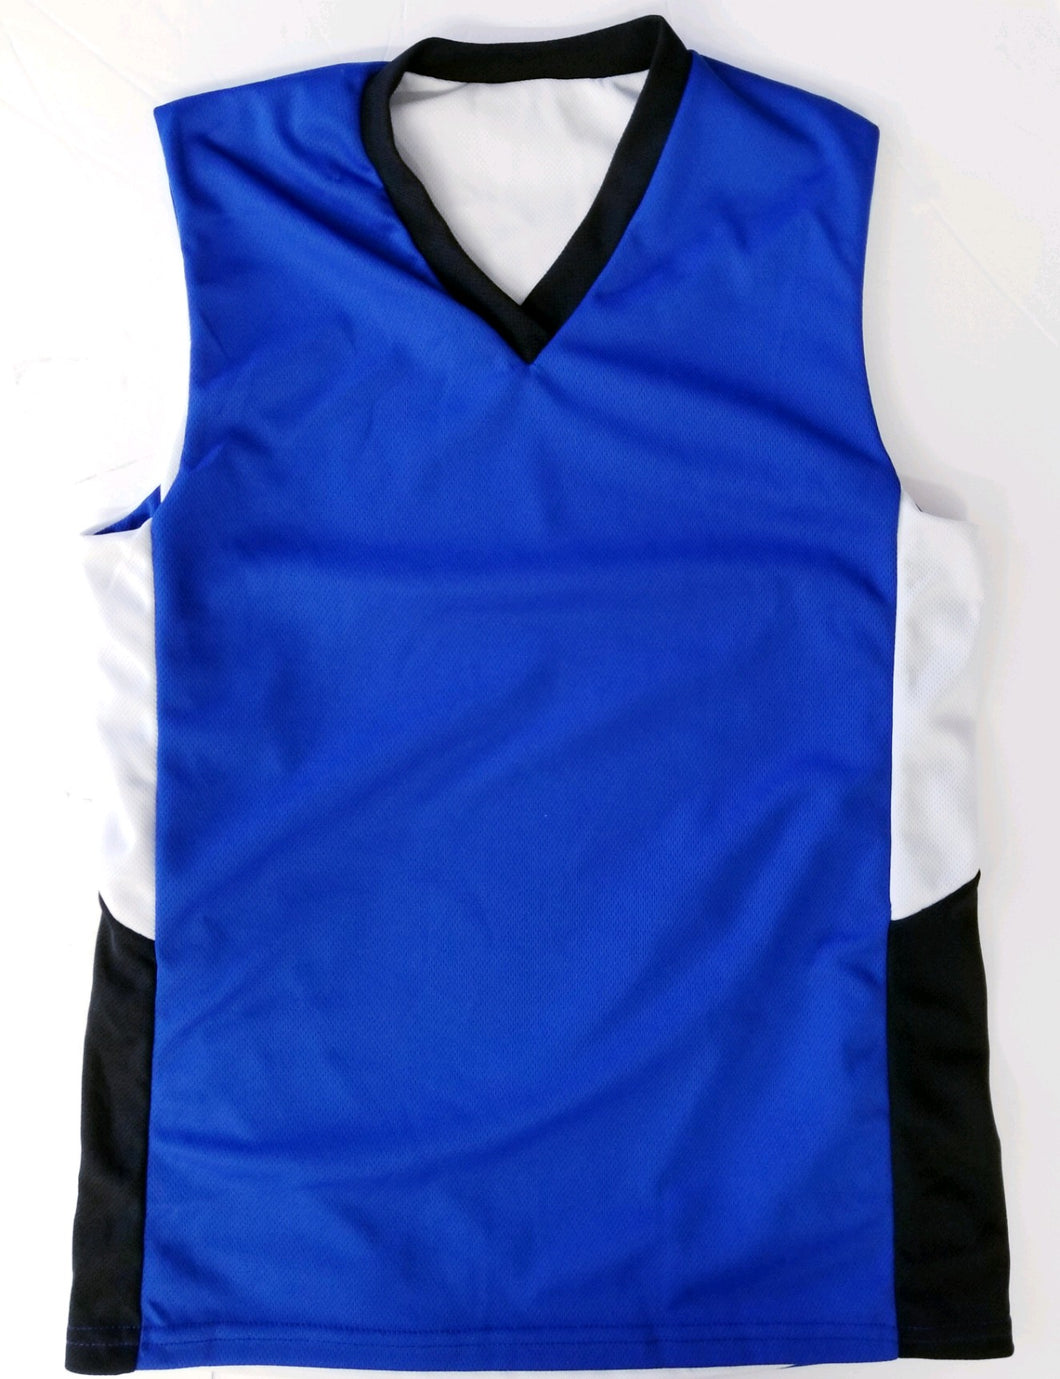 BASKETBALL JERSEY (TOP ONLY) VERSION #1